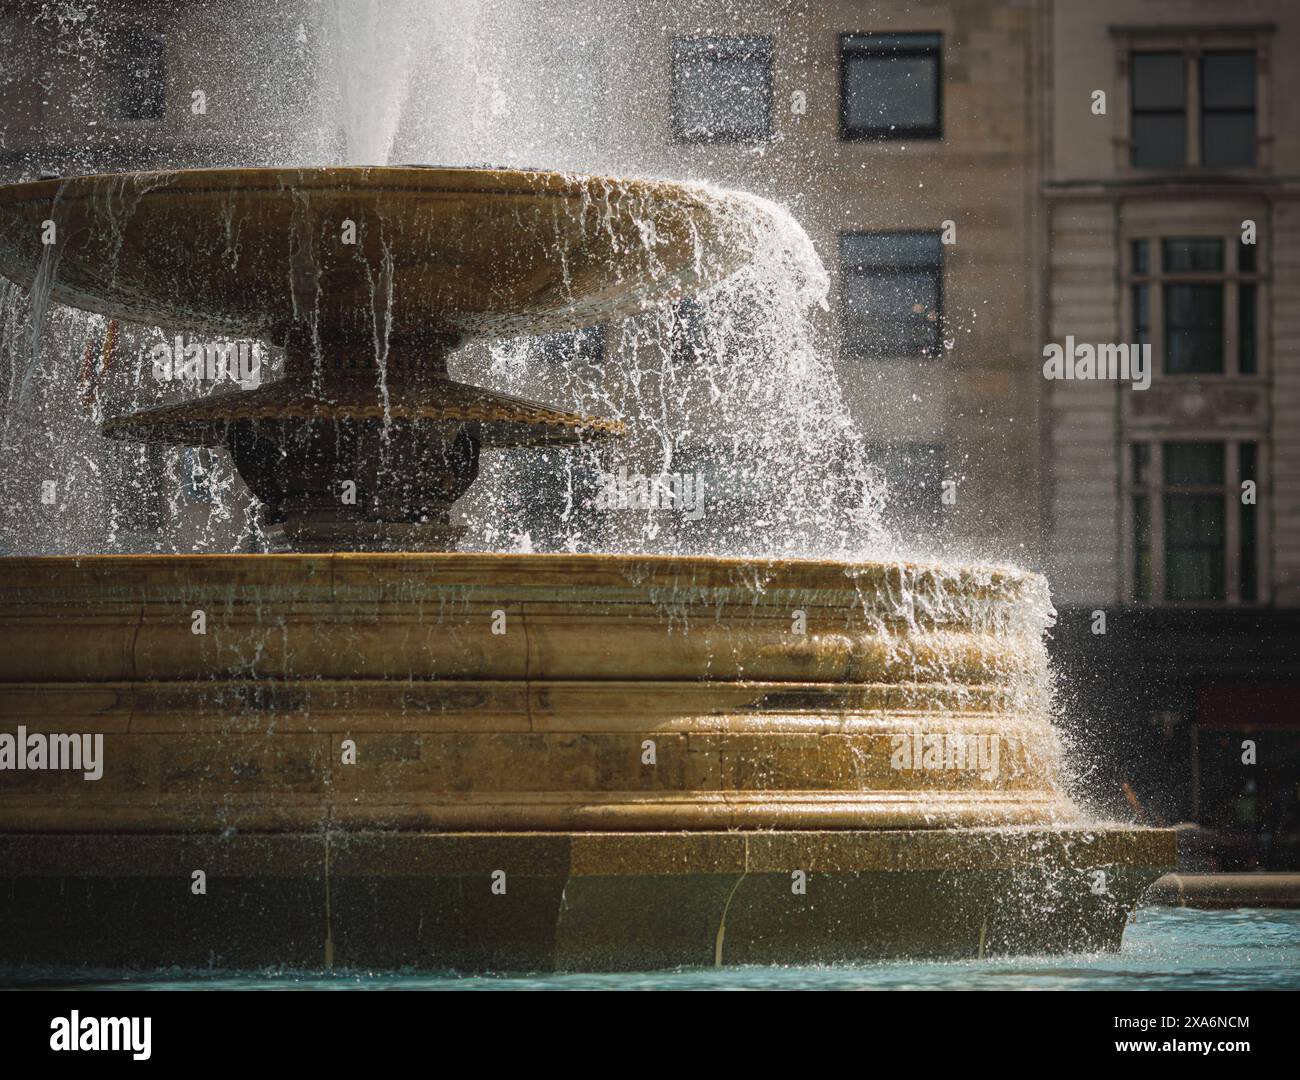 A building with a water fountain splashing water. Stock Photo